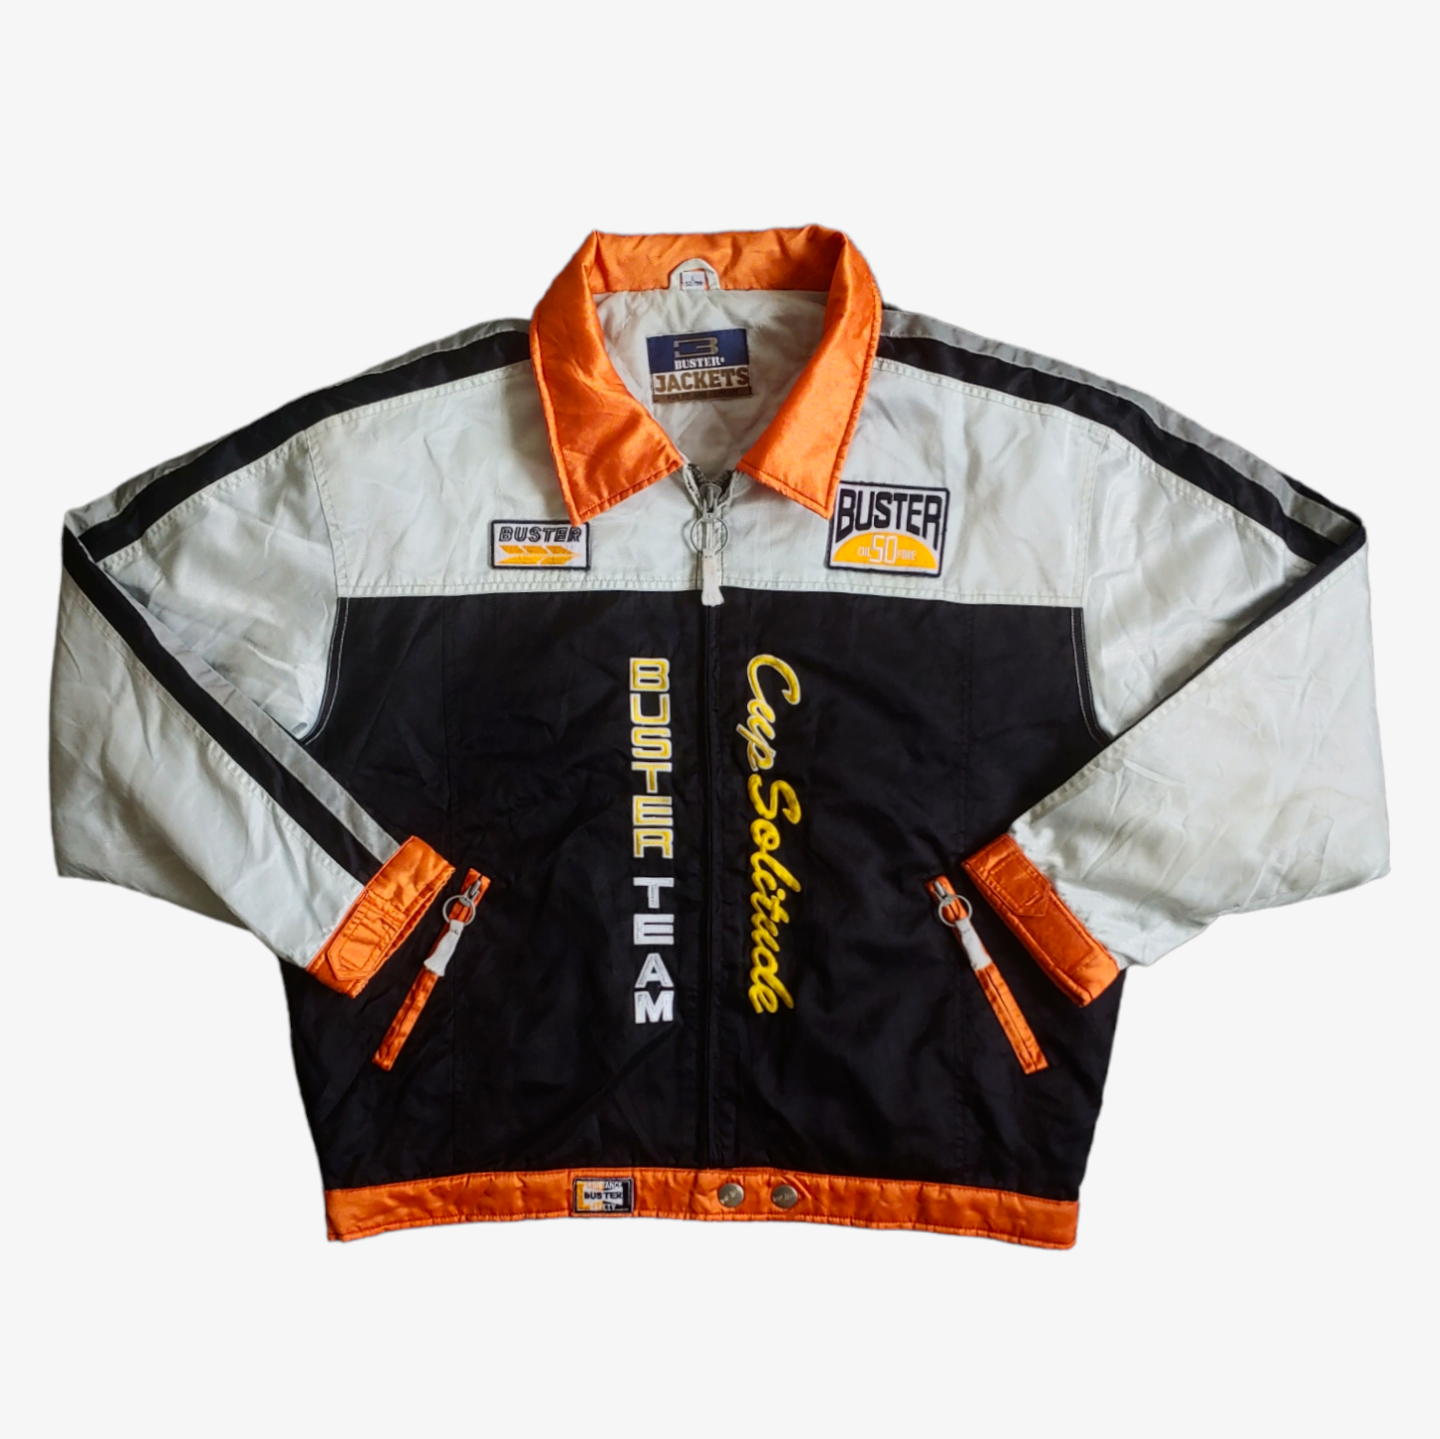 Vintage Y2K Buster Racing Team Jacket With Back Embroidered Spell Out - Casspios Dream